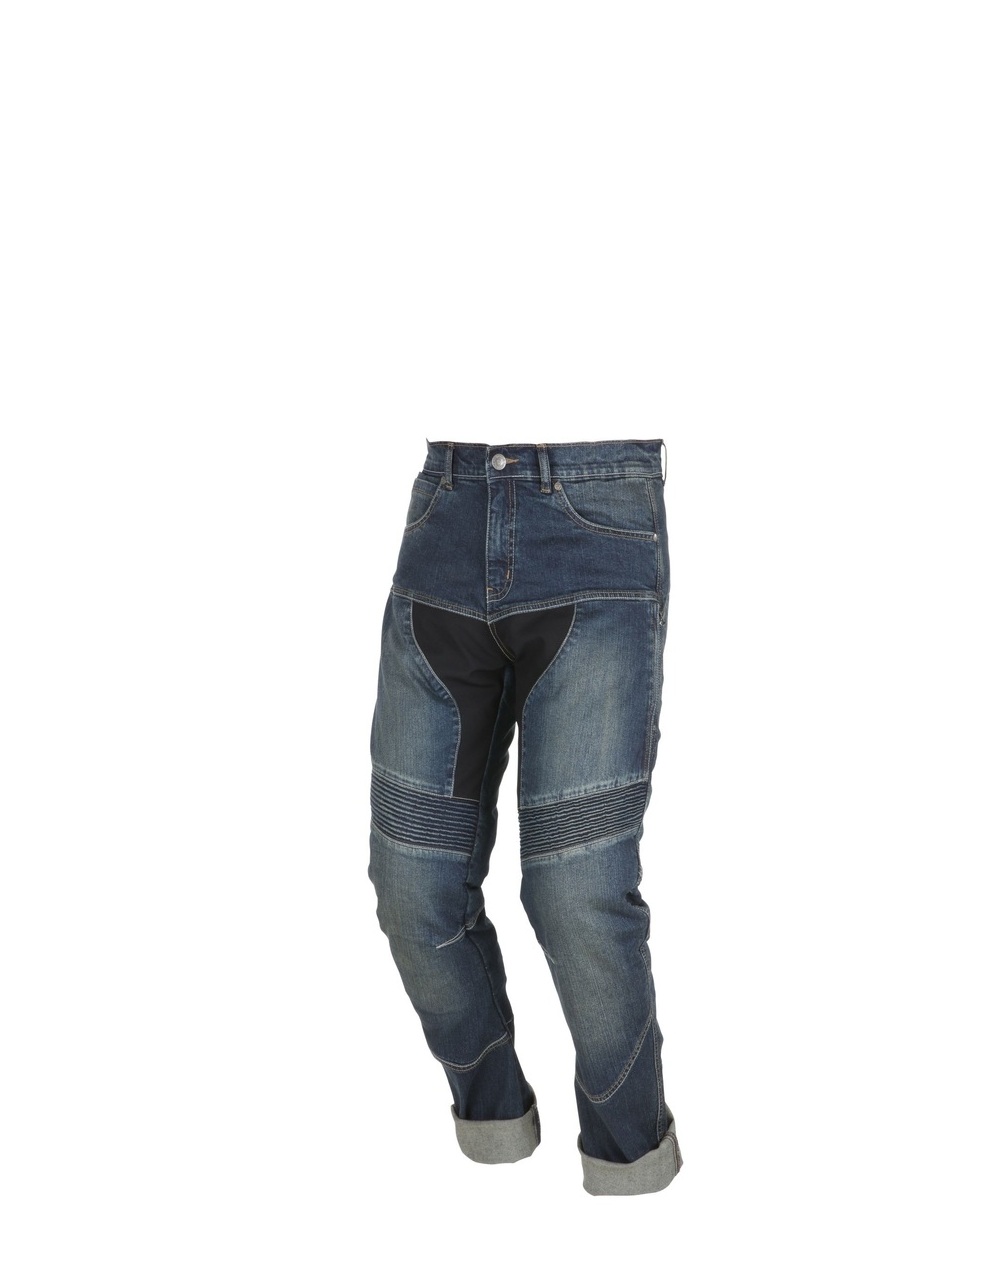 <span style="font-weight: bold;">БРЮКИ MODEKA JEANS BRONSTON BLUE&nbsp;</span>